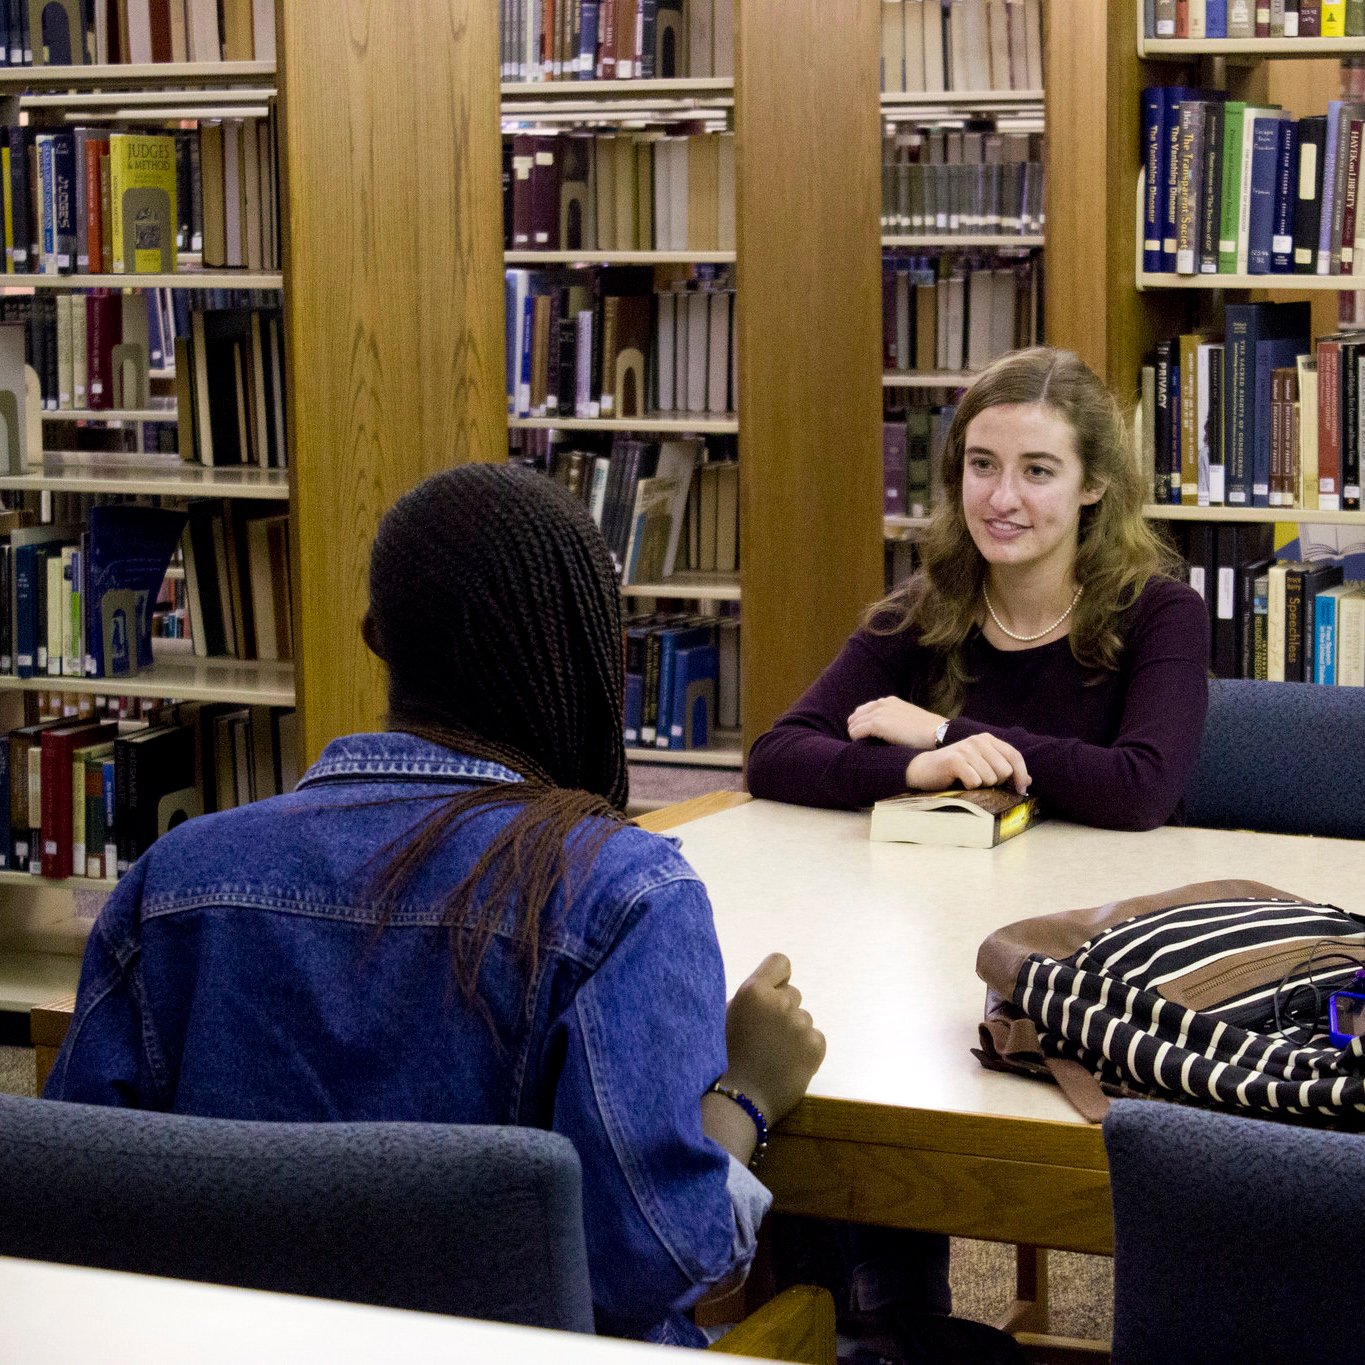 Two college students sitting at a desk inside a library, having a conversation.